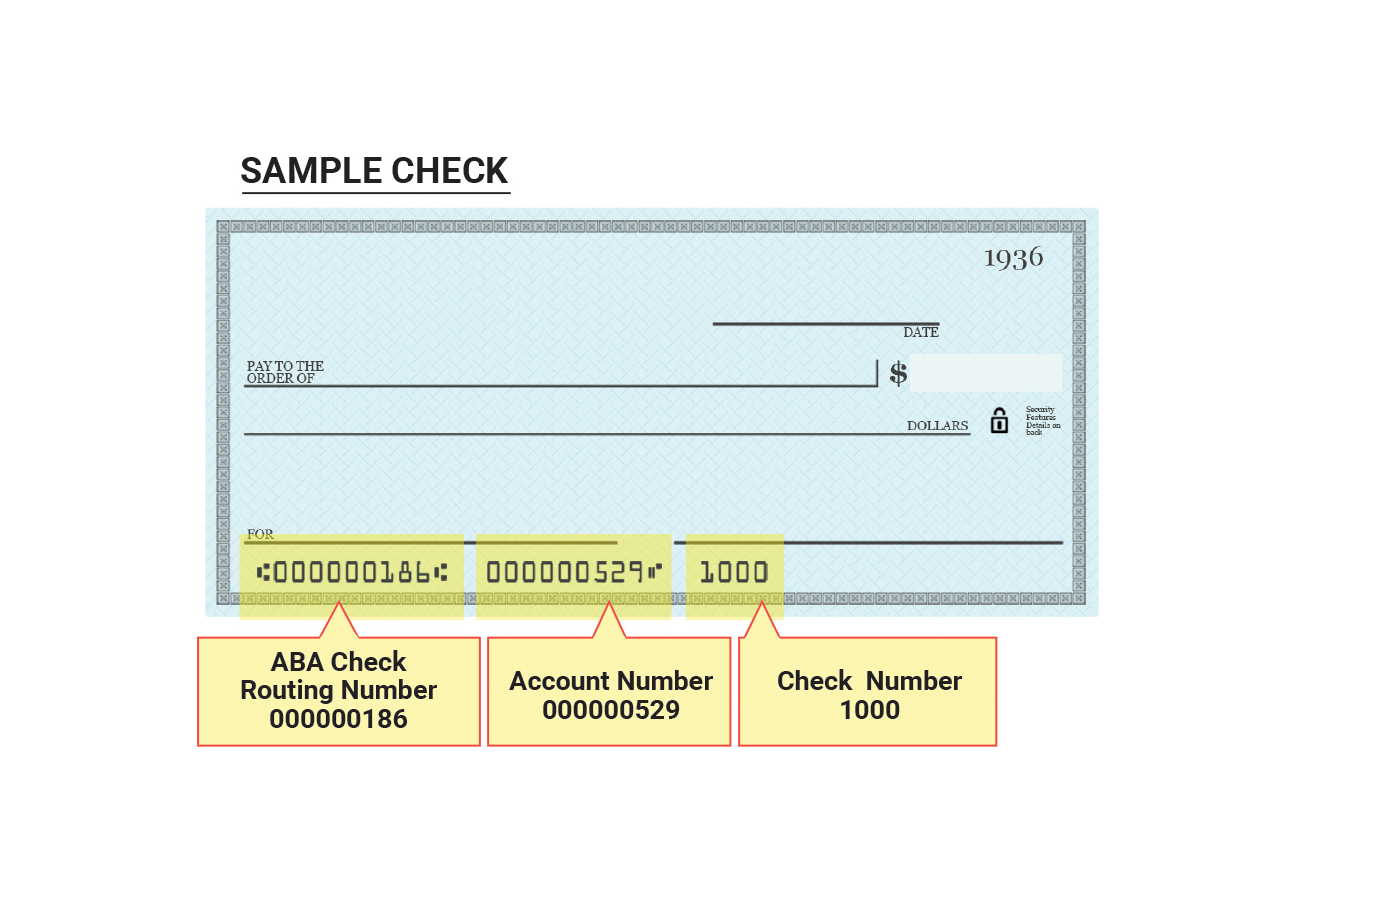 T me account number. Account number routing number. Cheque examples. Ава routing number check. Account number on check.